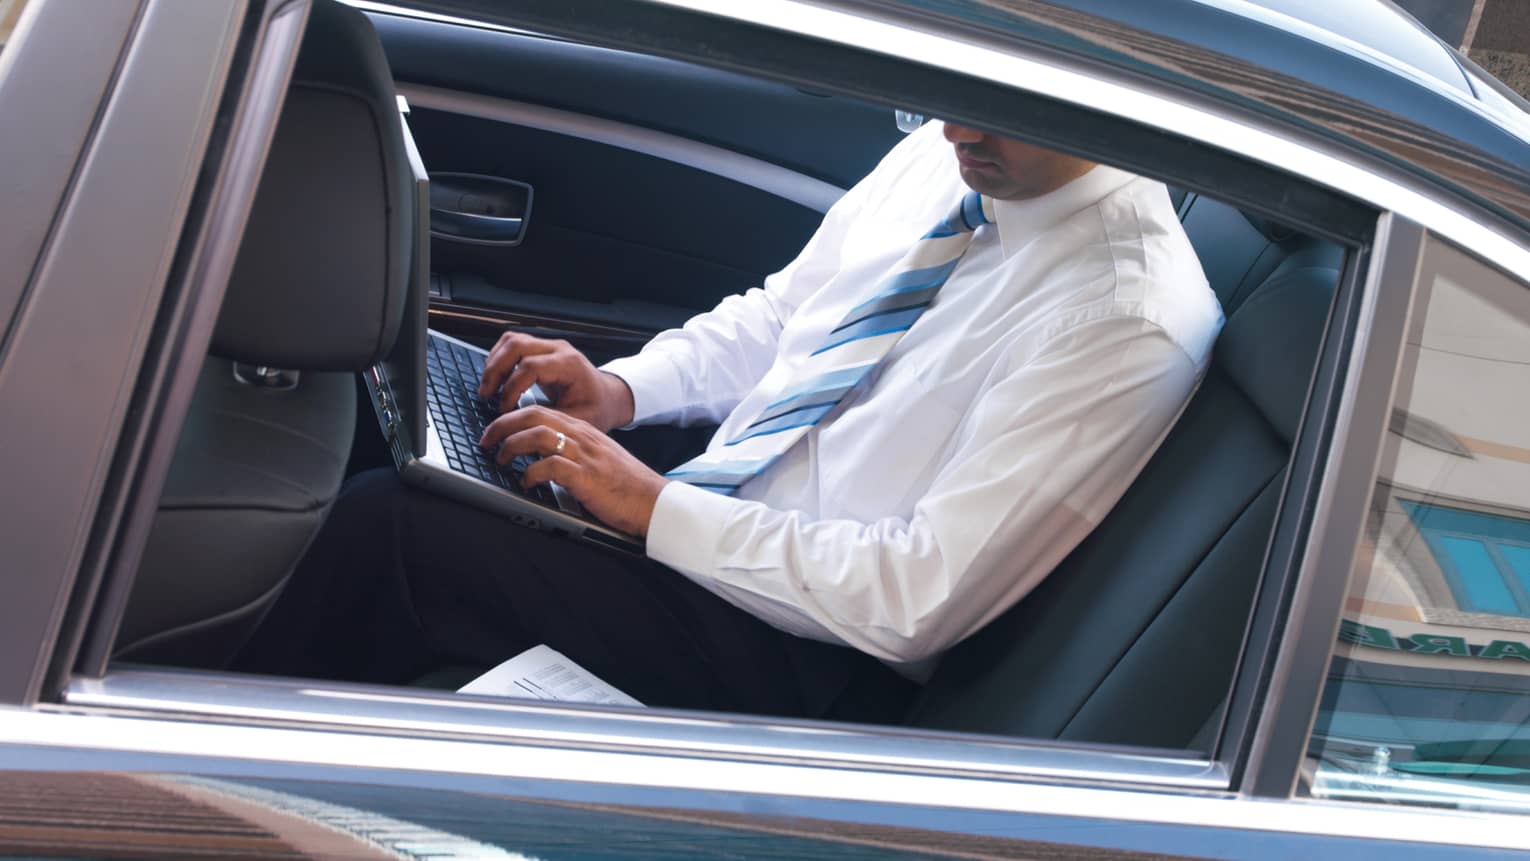 View of car window where man in white dress shirt and blue-and-white tie sits in backseat, works on laptop computer